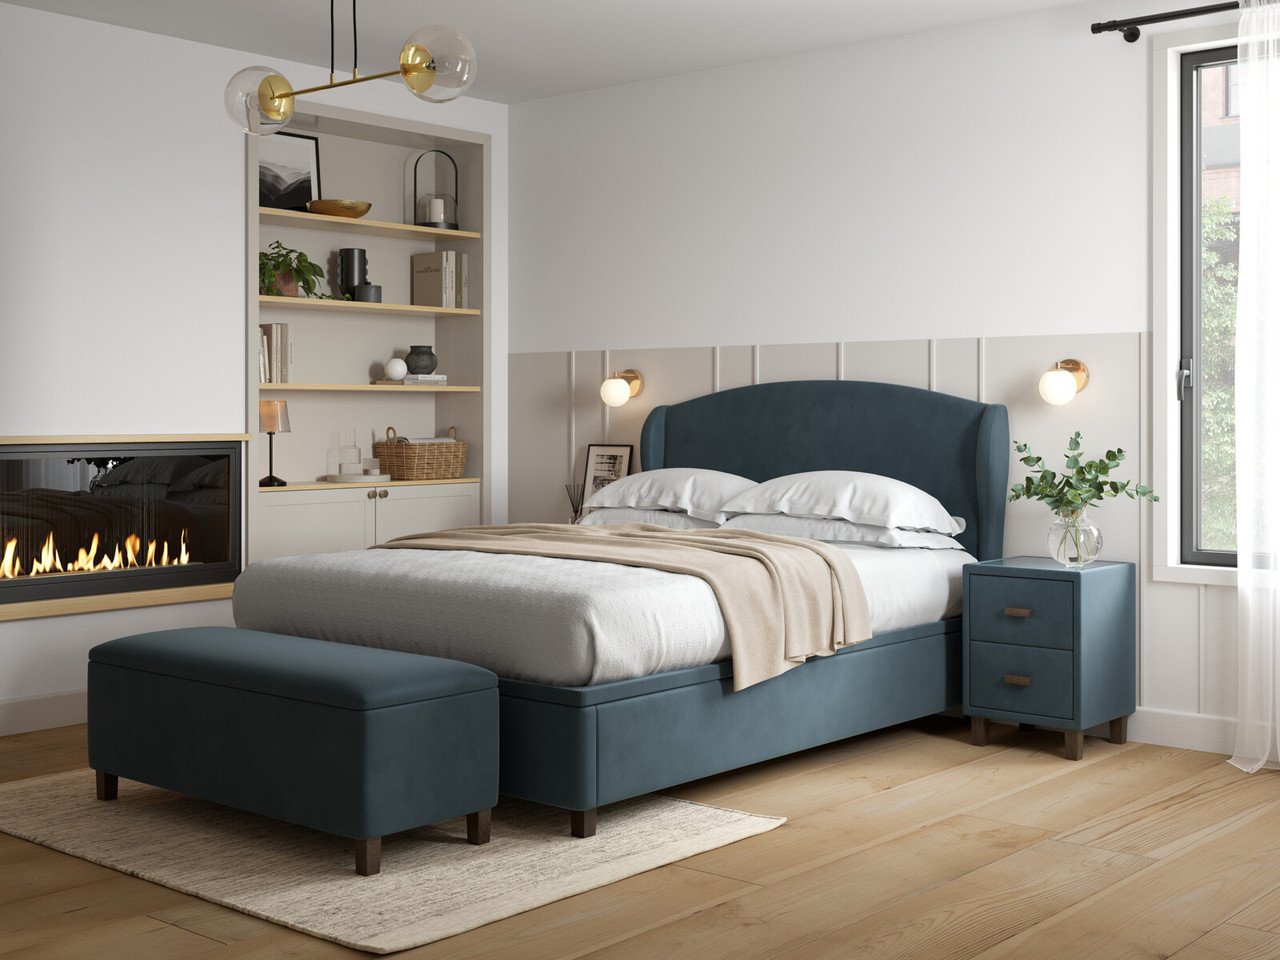 Snooze Sunset Ottoman Bed Frame Double Opulence Petrol